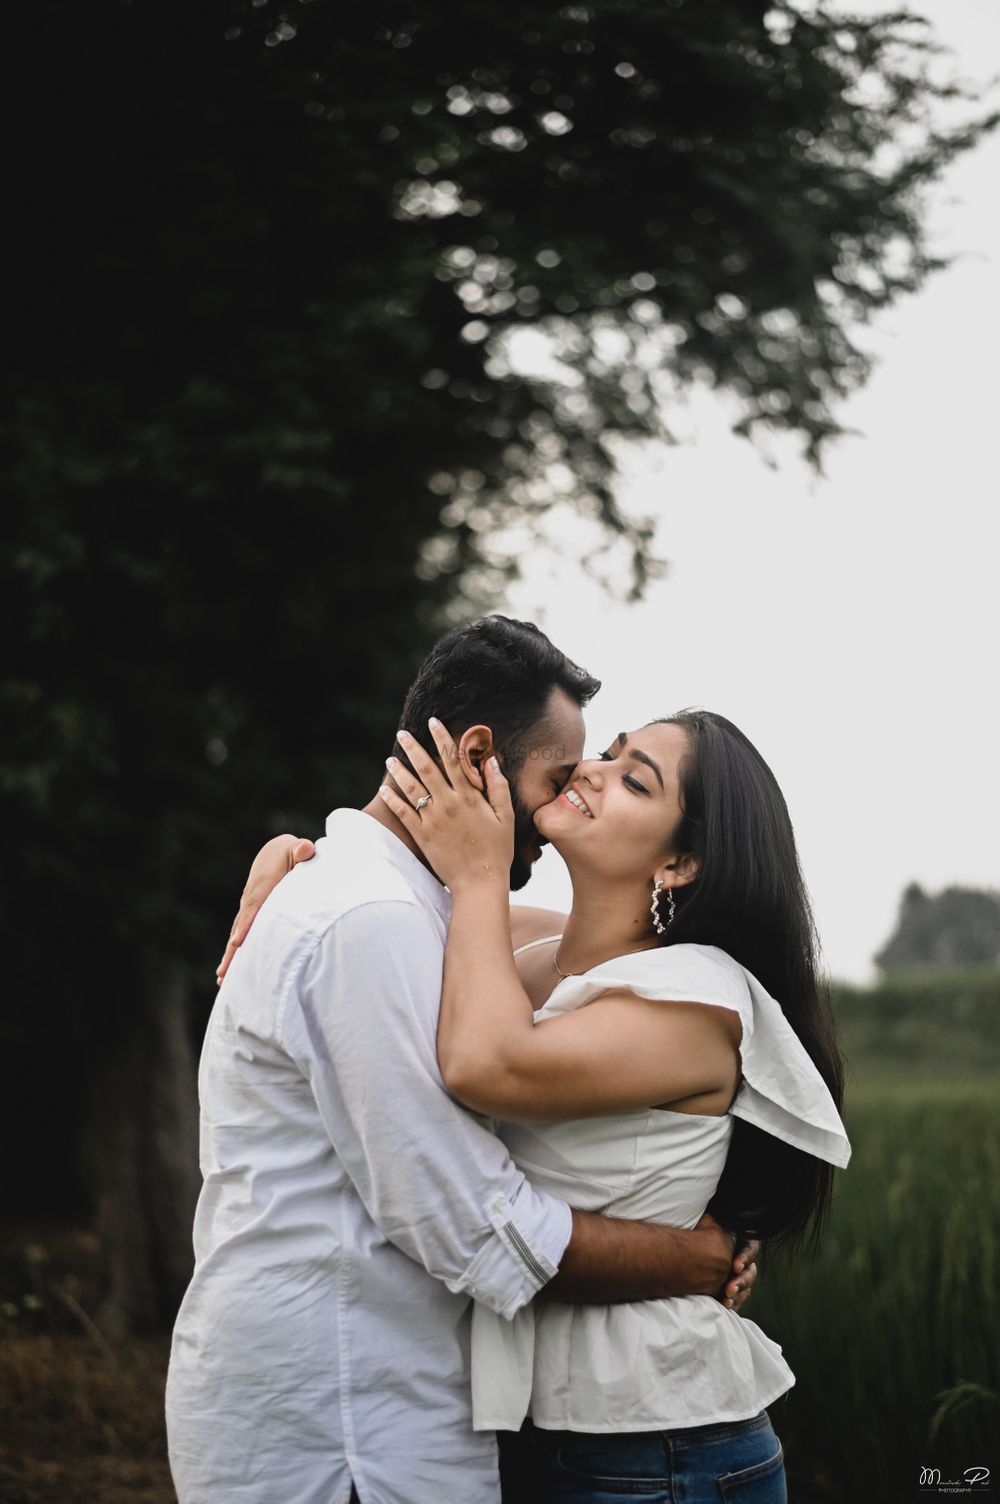 Photo From Intimate Pre Wed - By Camerography